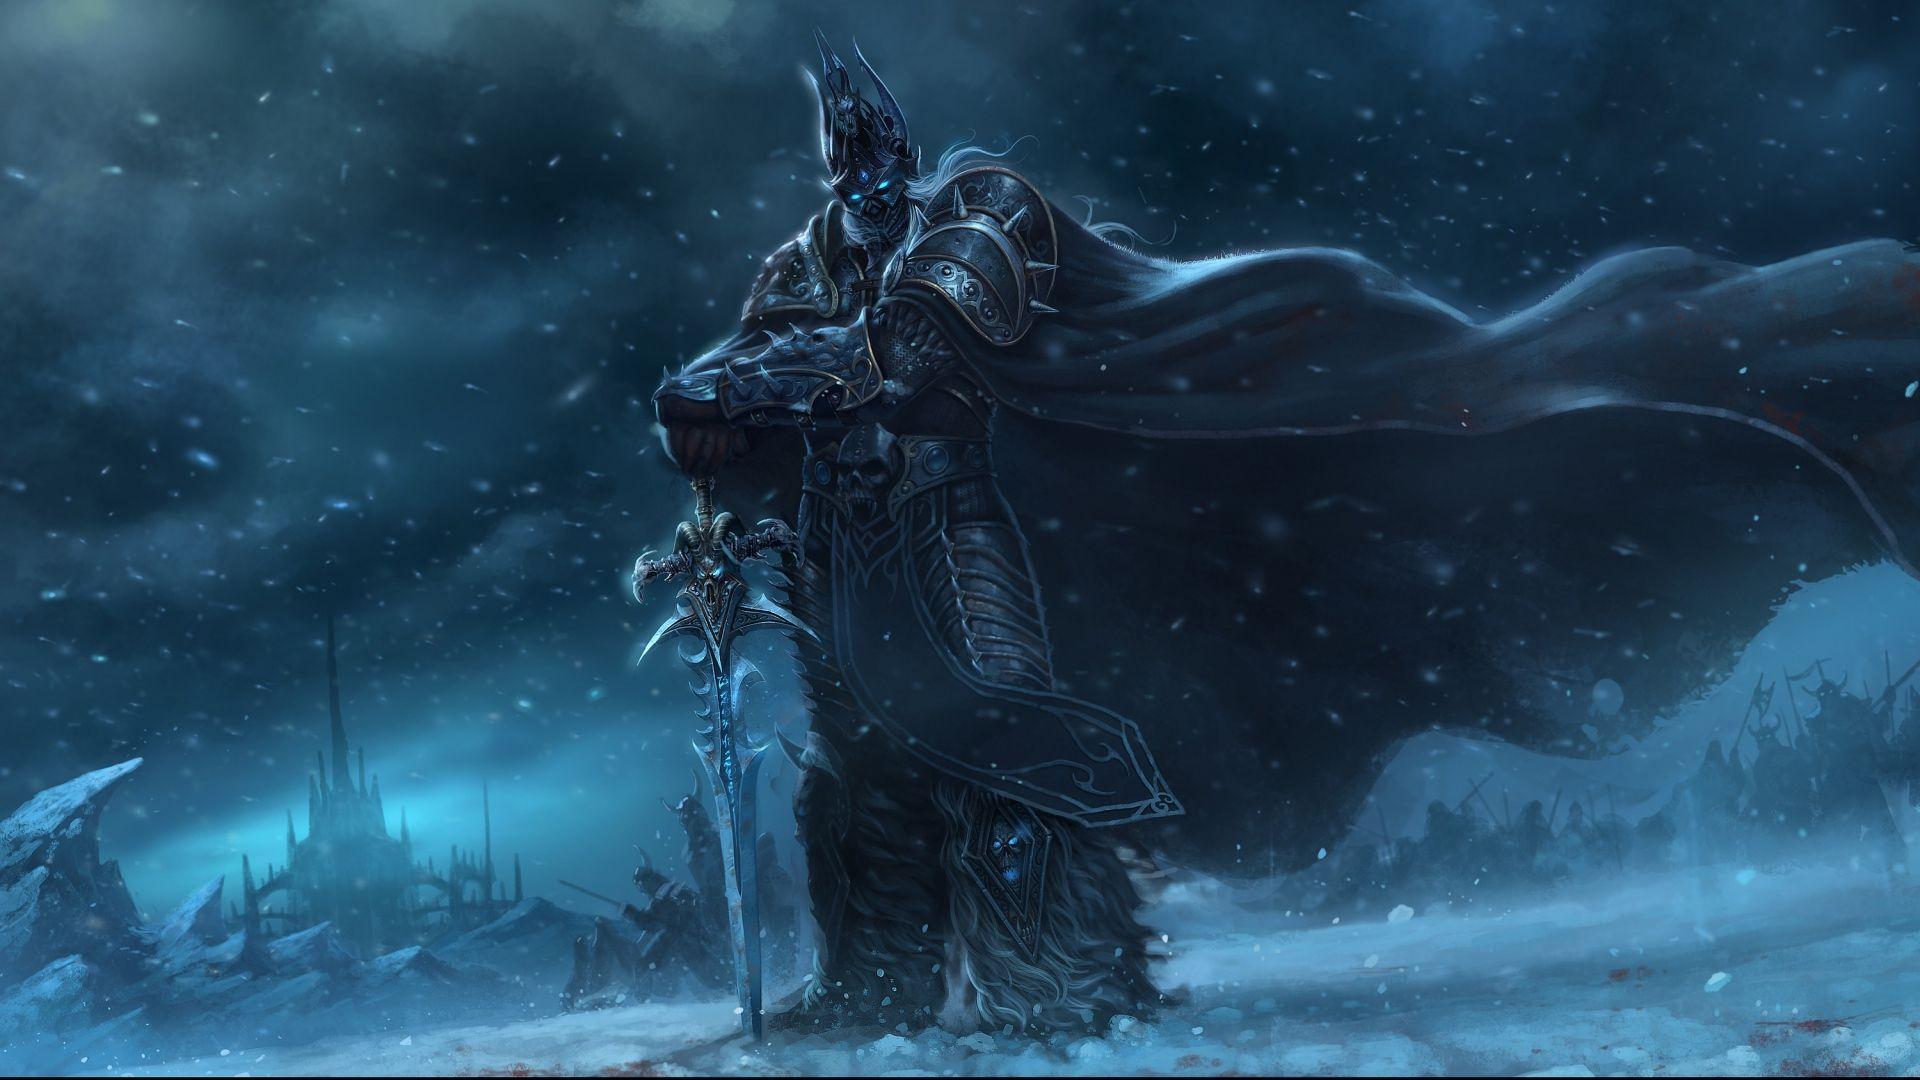 world of warcraft wallpapers 1920x1080